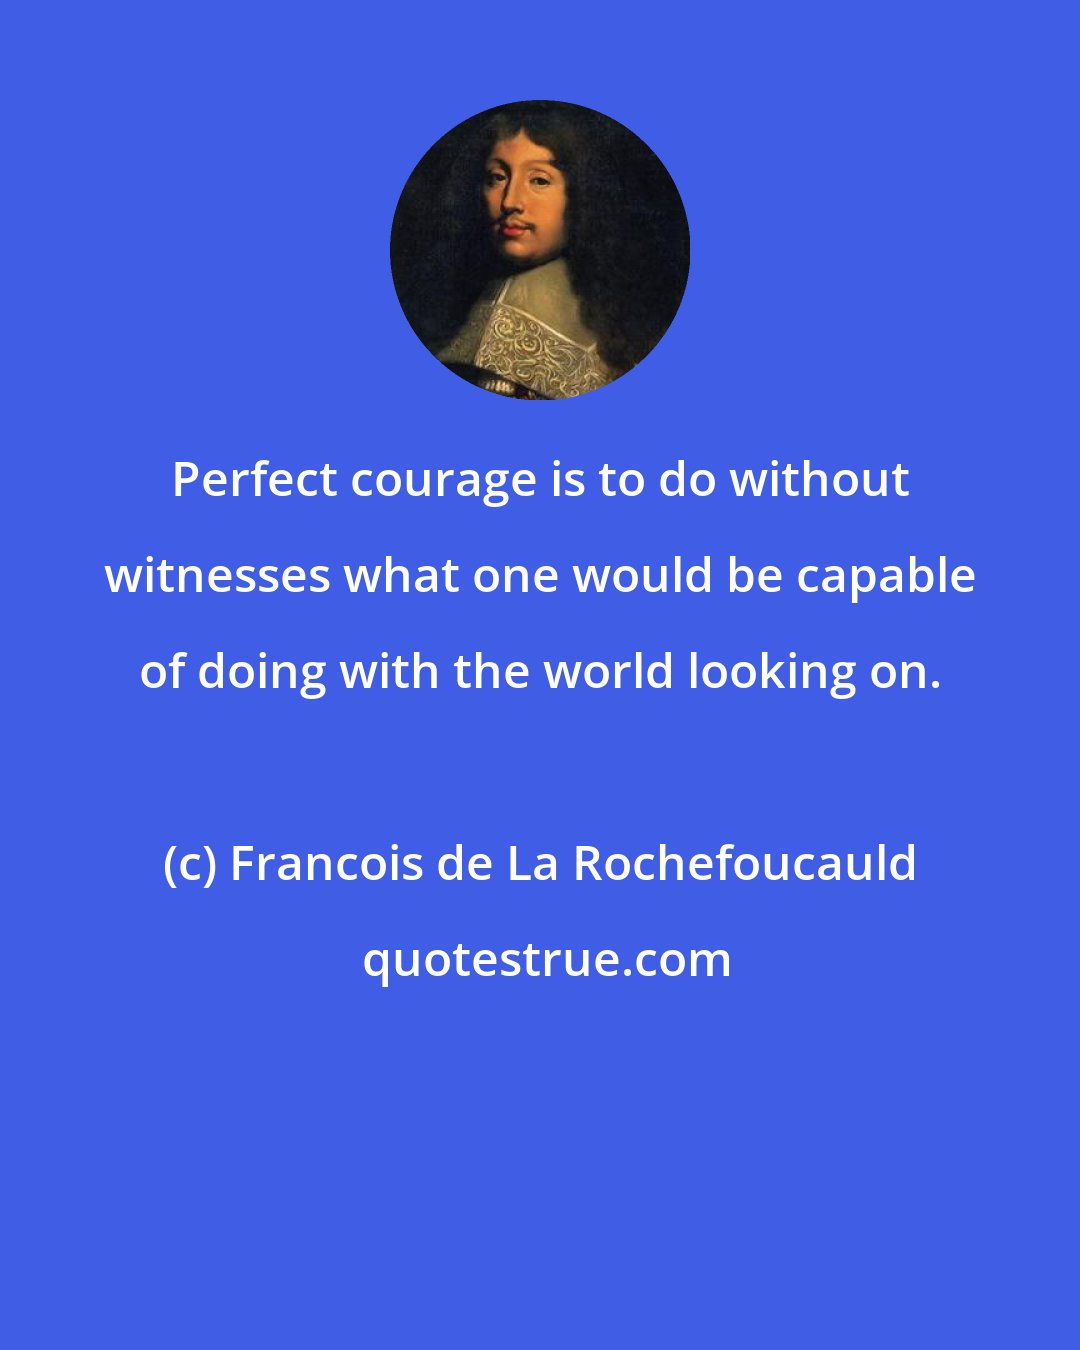 Francois de La Rochefoucauld: Perfect courage is to do without witnesses what one would be capable of doing with the world looking on.